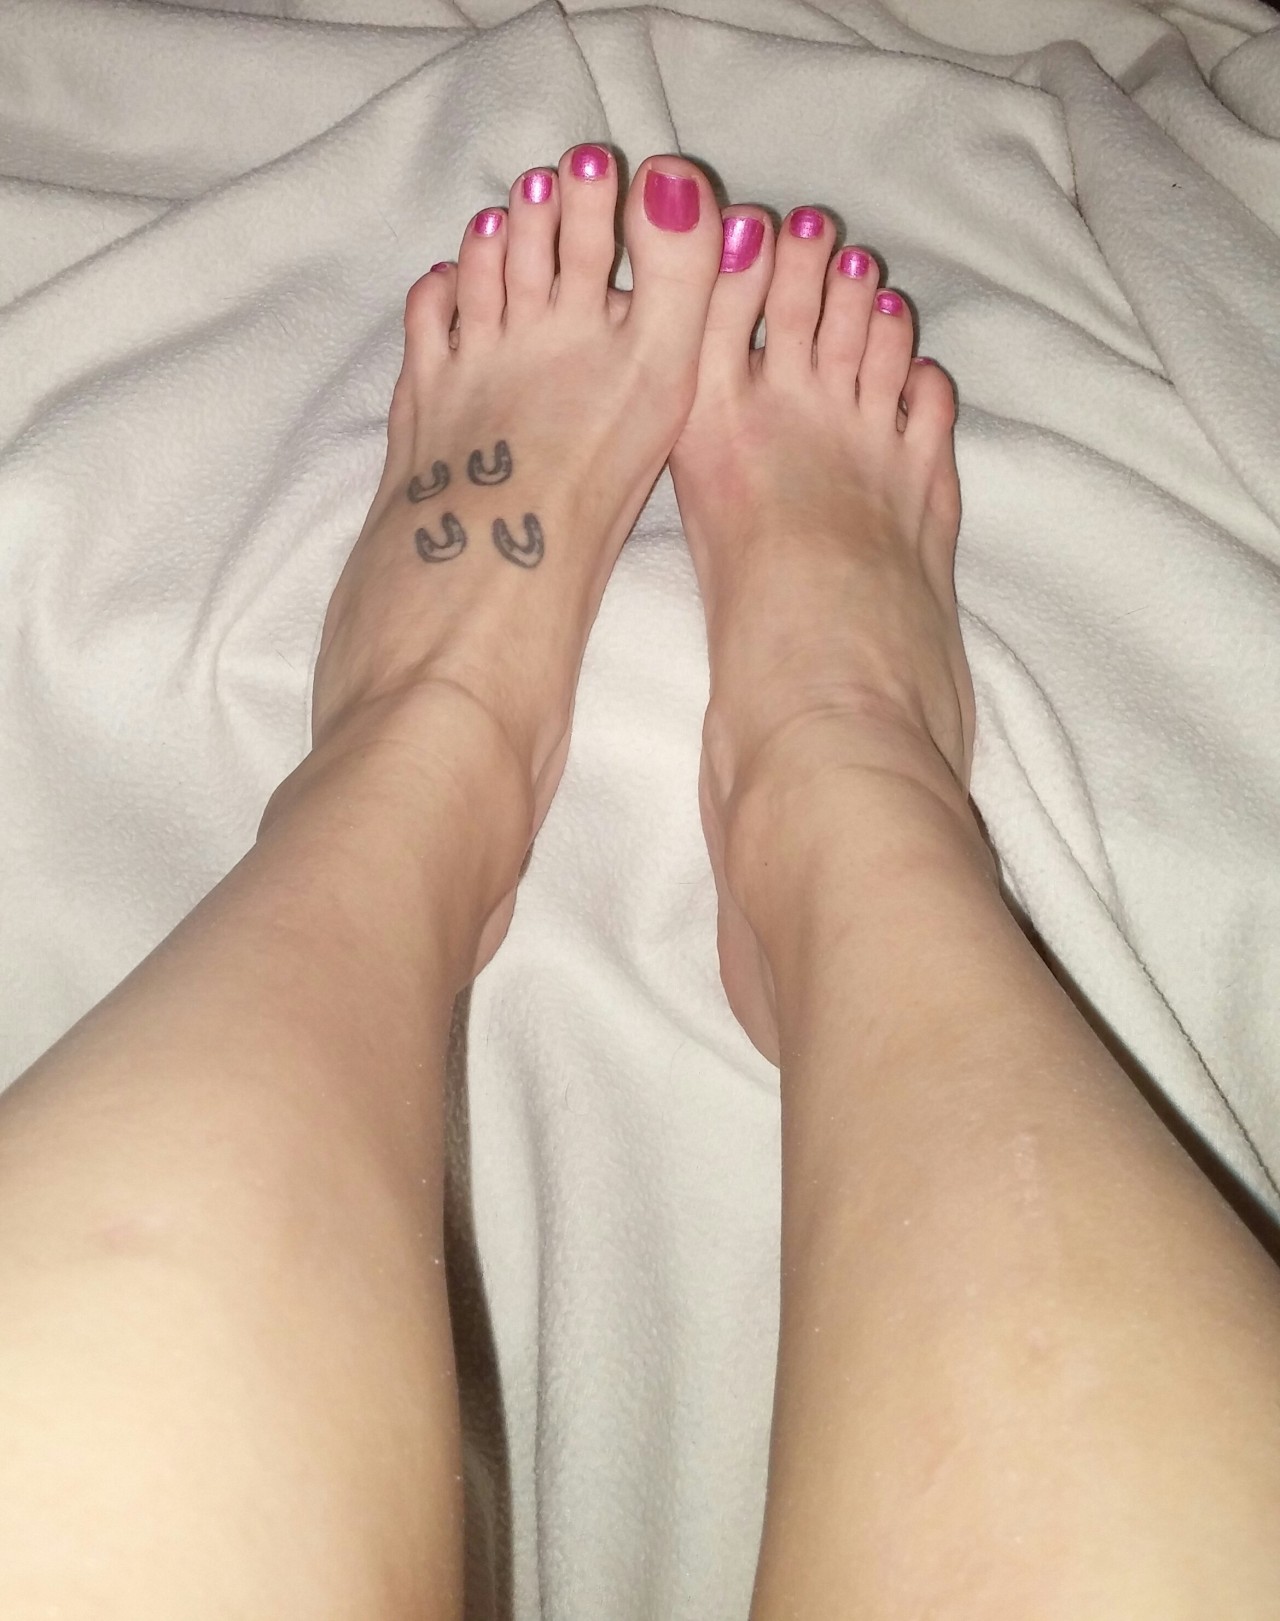 I Had My Color Changed Today As Requested Via Feet Toes Footfetis